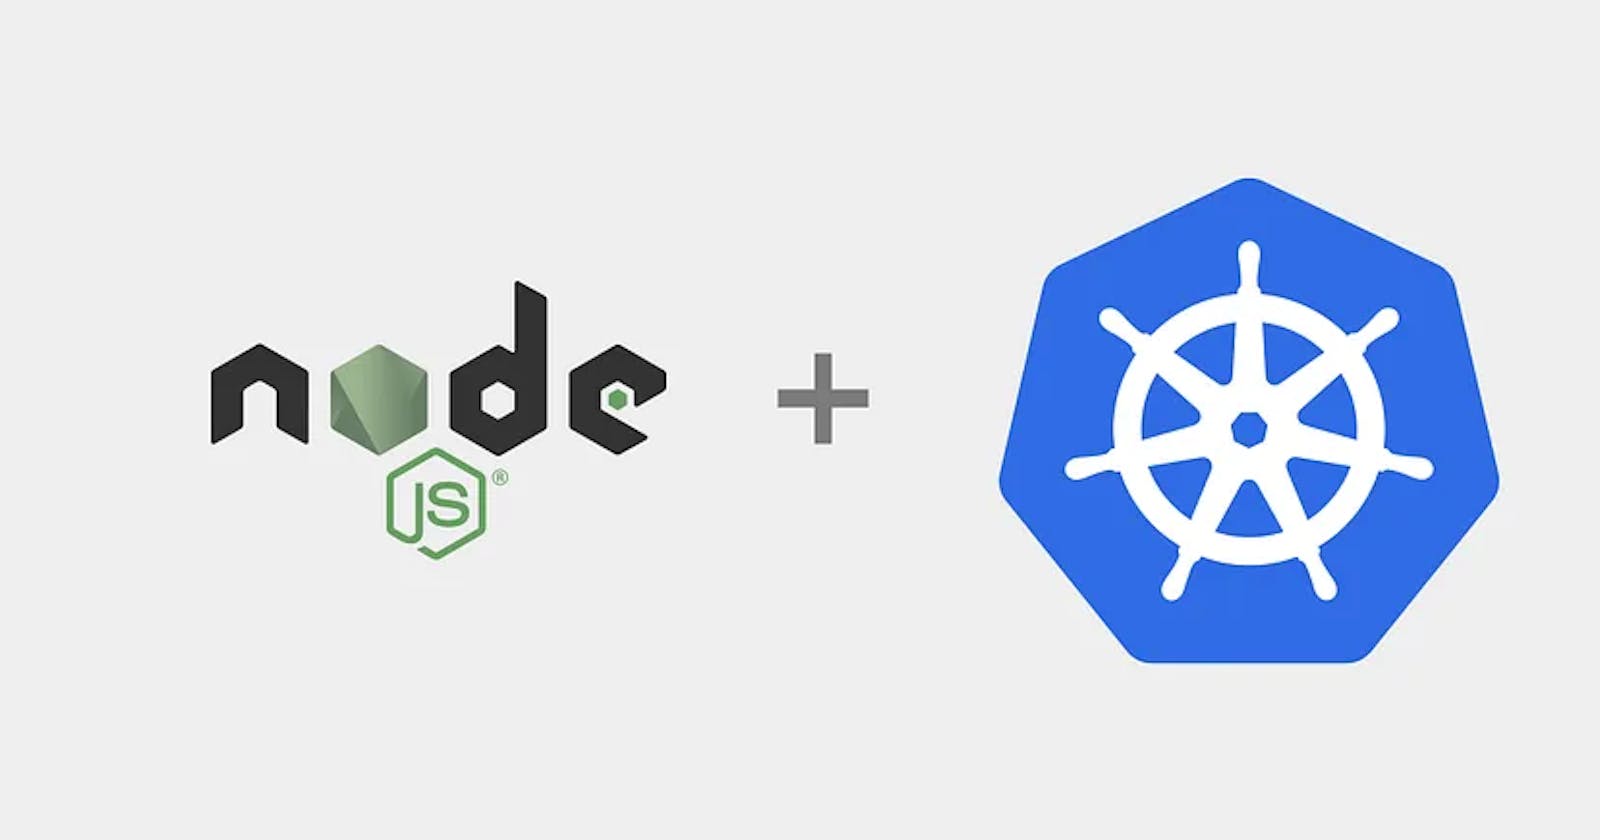 Day: 11 - Installing Node.js Application on Kubernetes with Helm